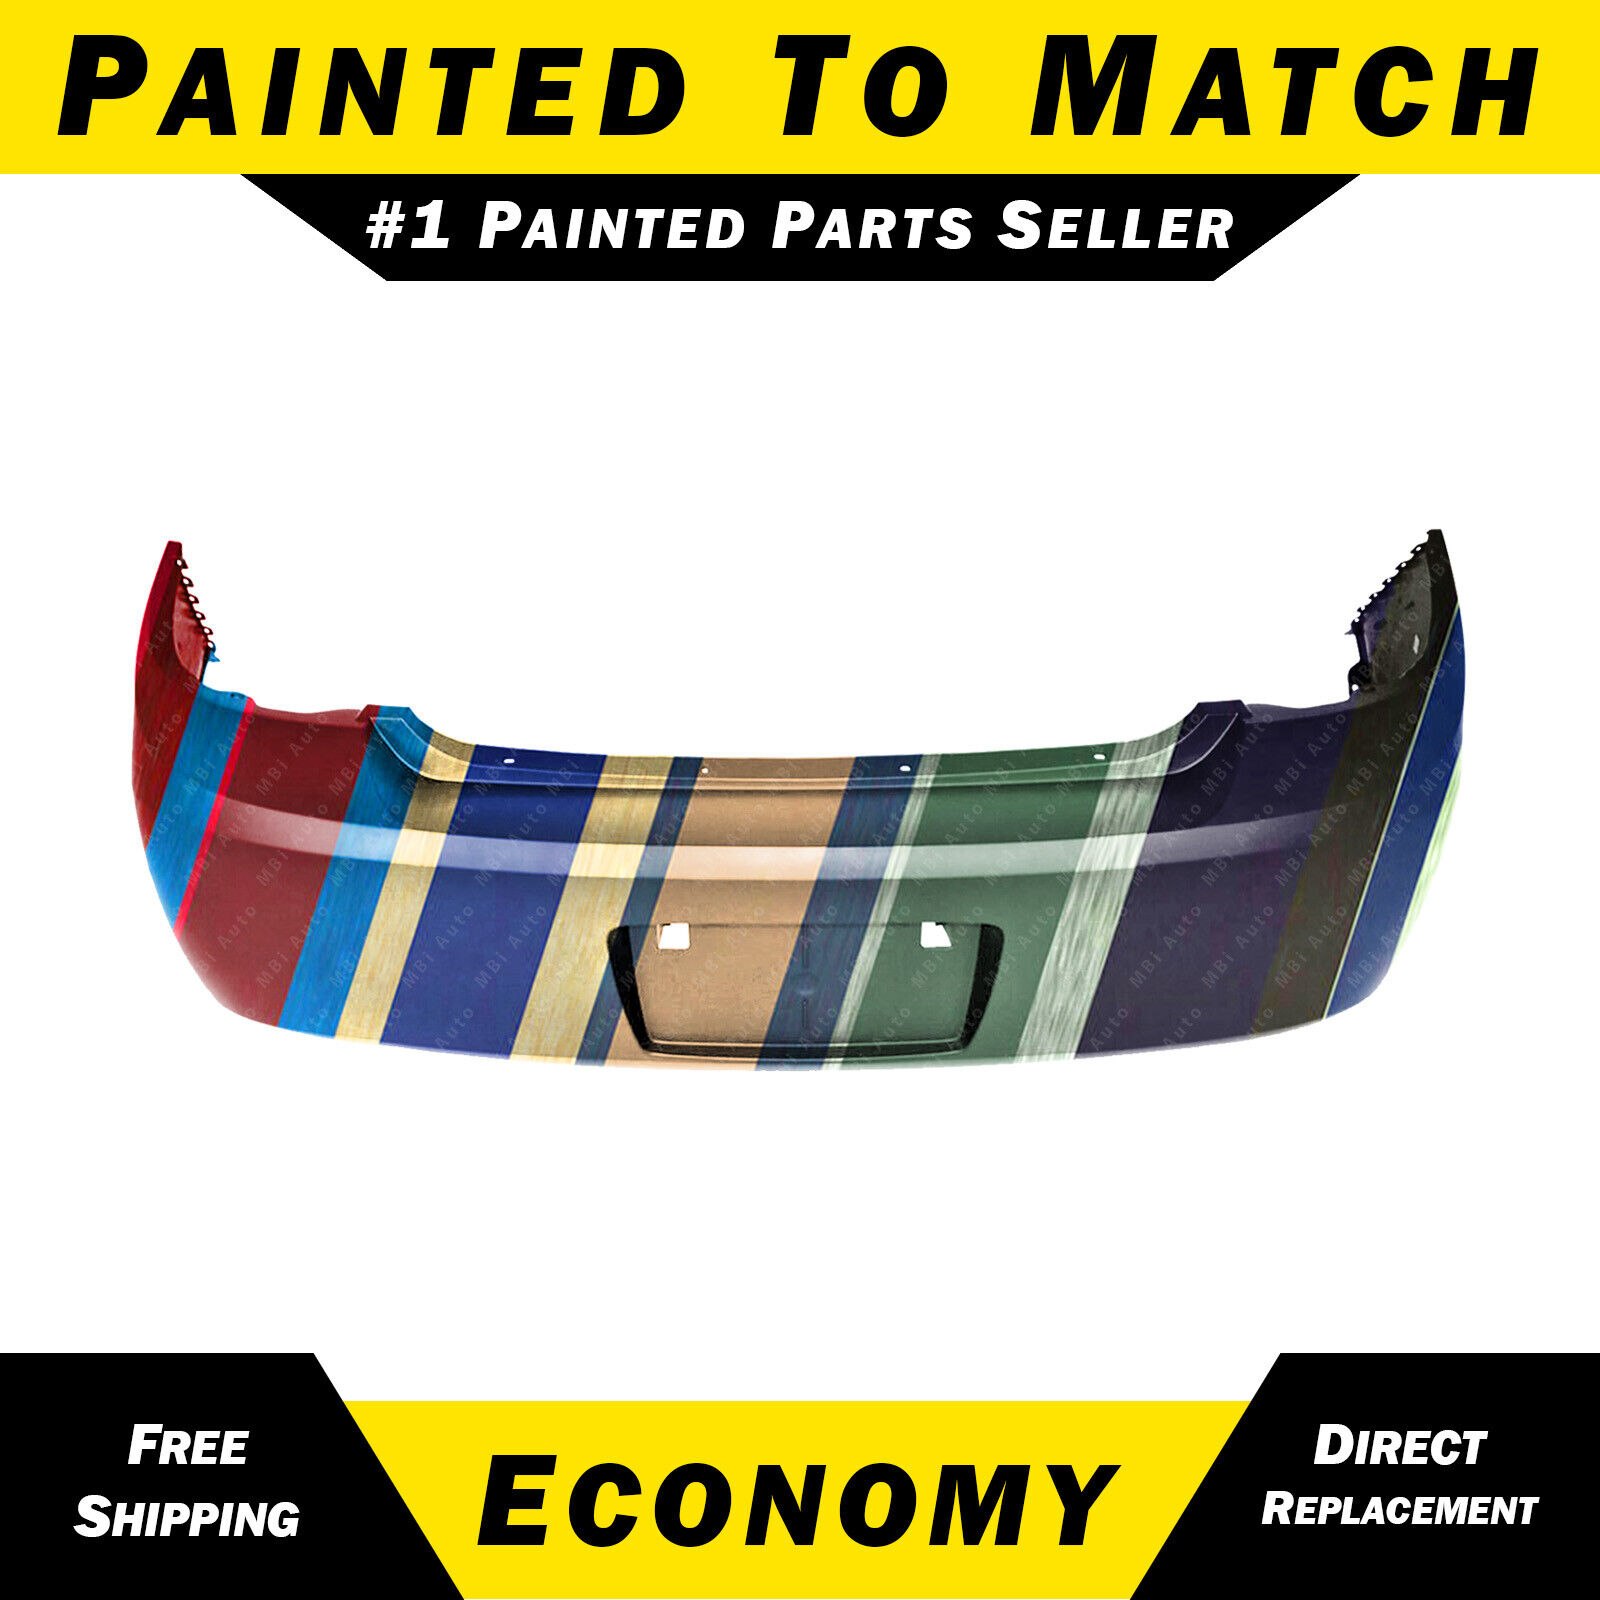 NEW Painted To Match - Rear Bumper Cover for 2005-2010 Pontiac G5 & Chevy Cobalt